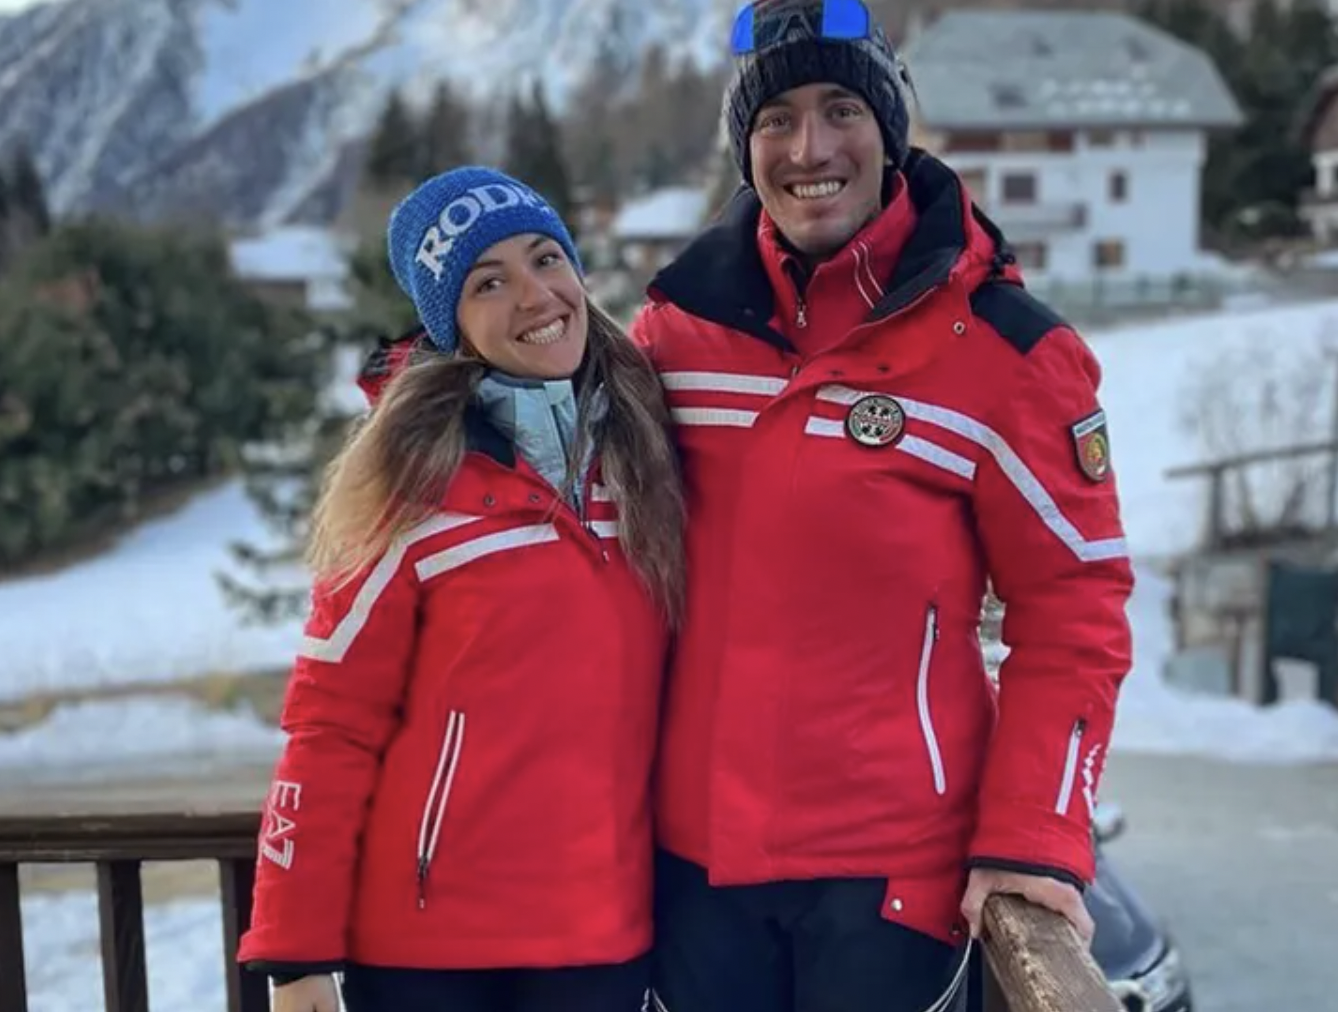 World Cup Skier And Girlfriend Dead After Falling 2,300 Feet Off Mountain